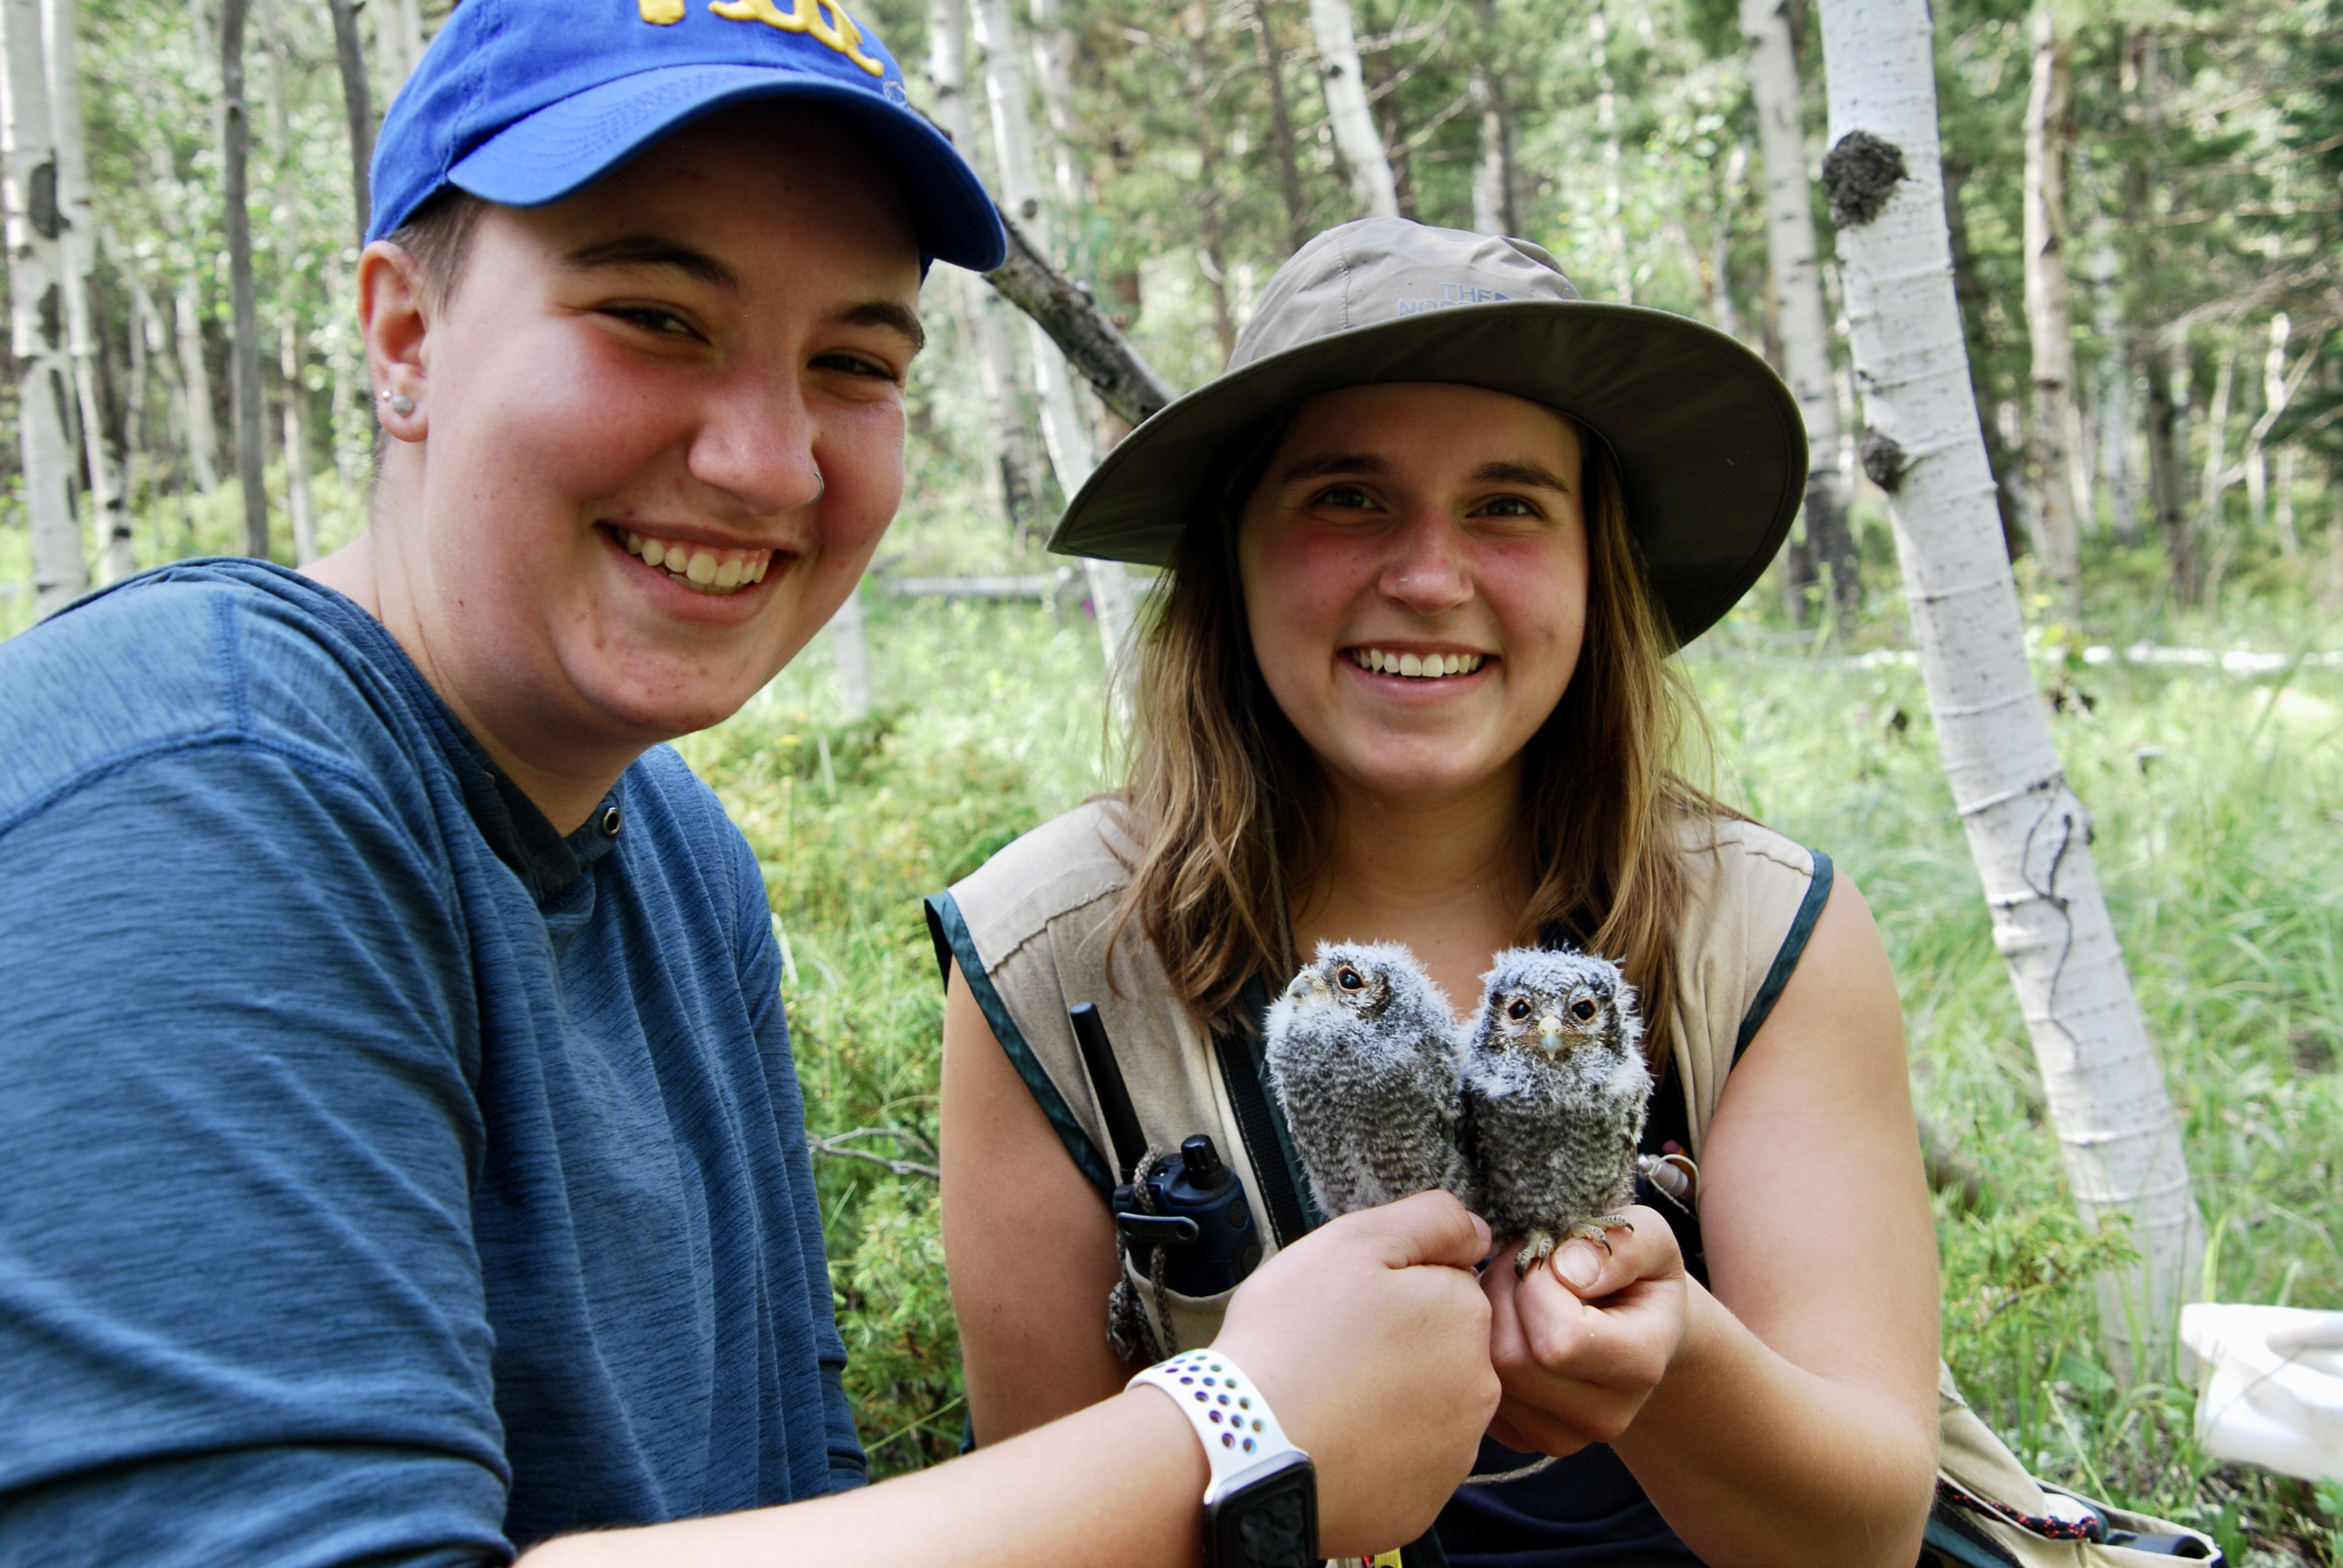 Courtney Knerr '21 and Megan McVeigh '23 with two Flammulated Owl chicks as part of their research with Prof. Brian Linkhart. <span class="cc-gallery-credit">[Olivia Noonan]</span>